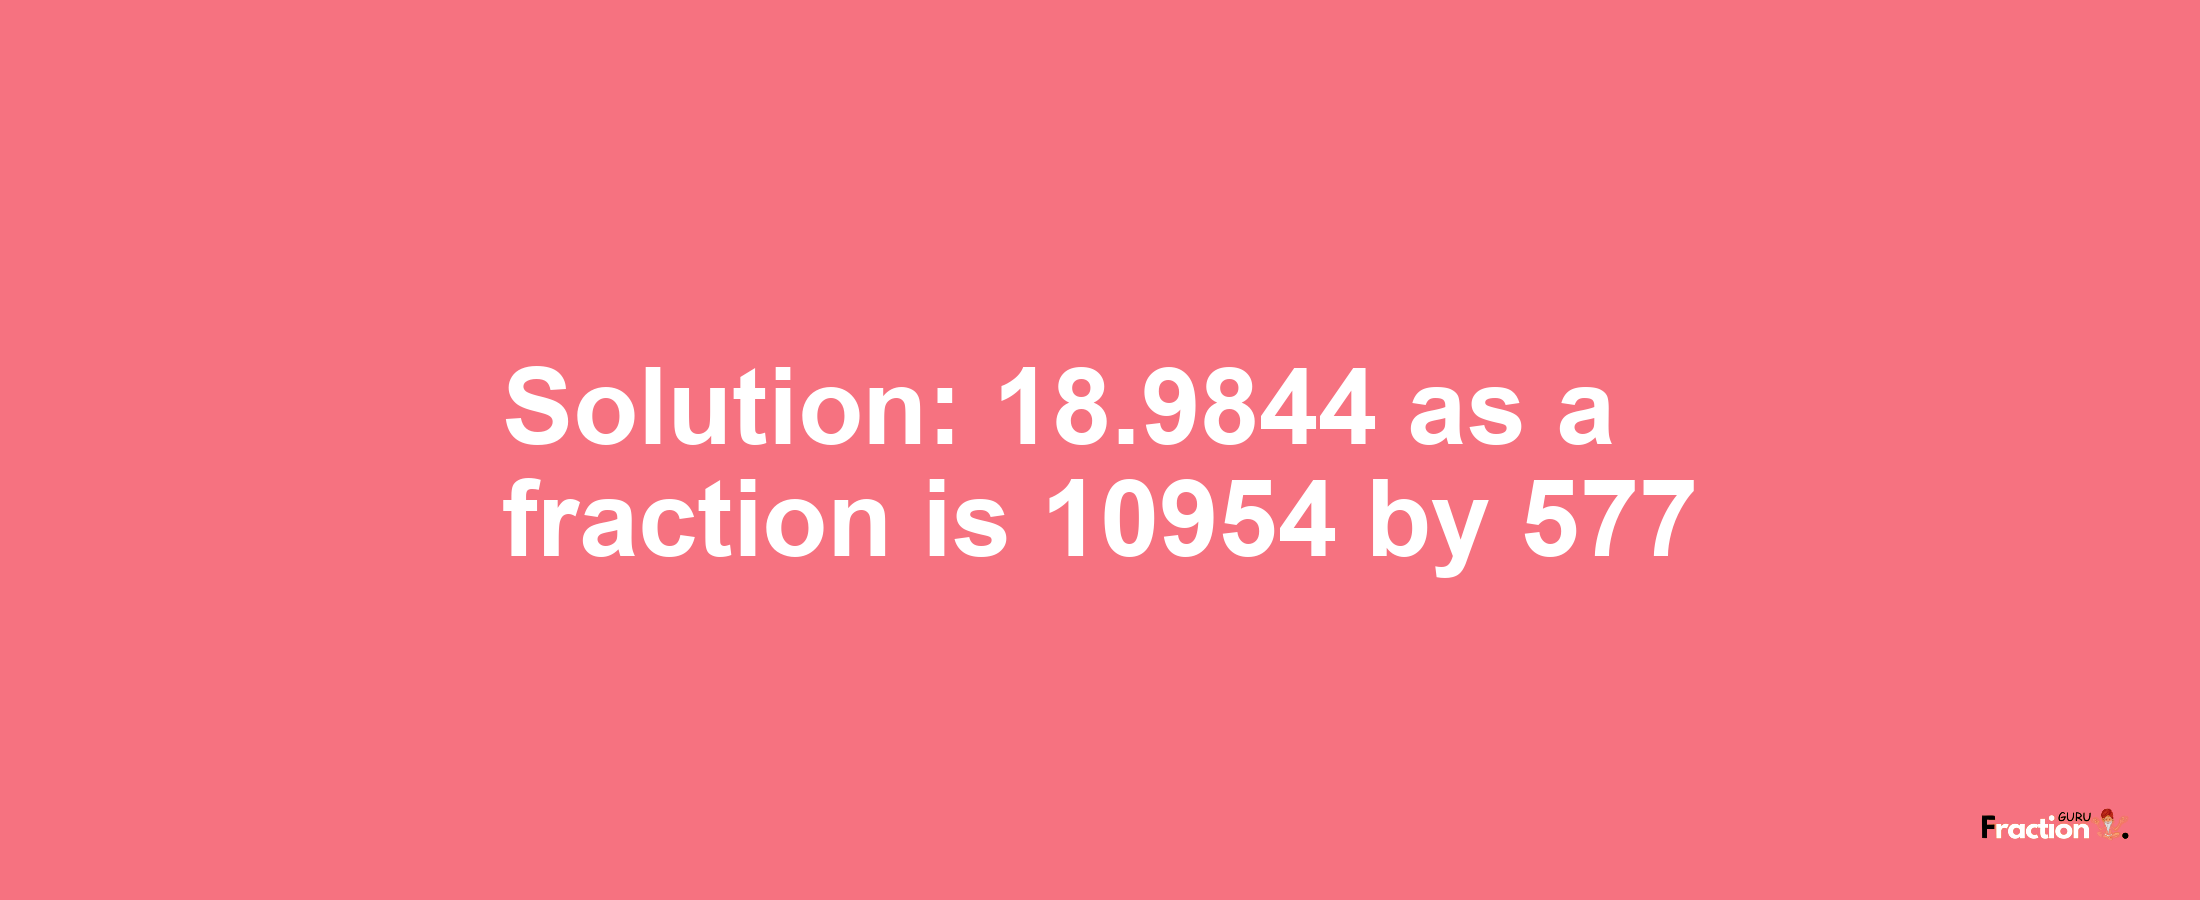 Solution:18.9844 as a fraction is 10954/577